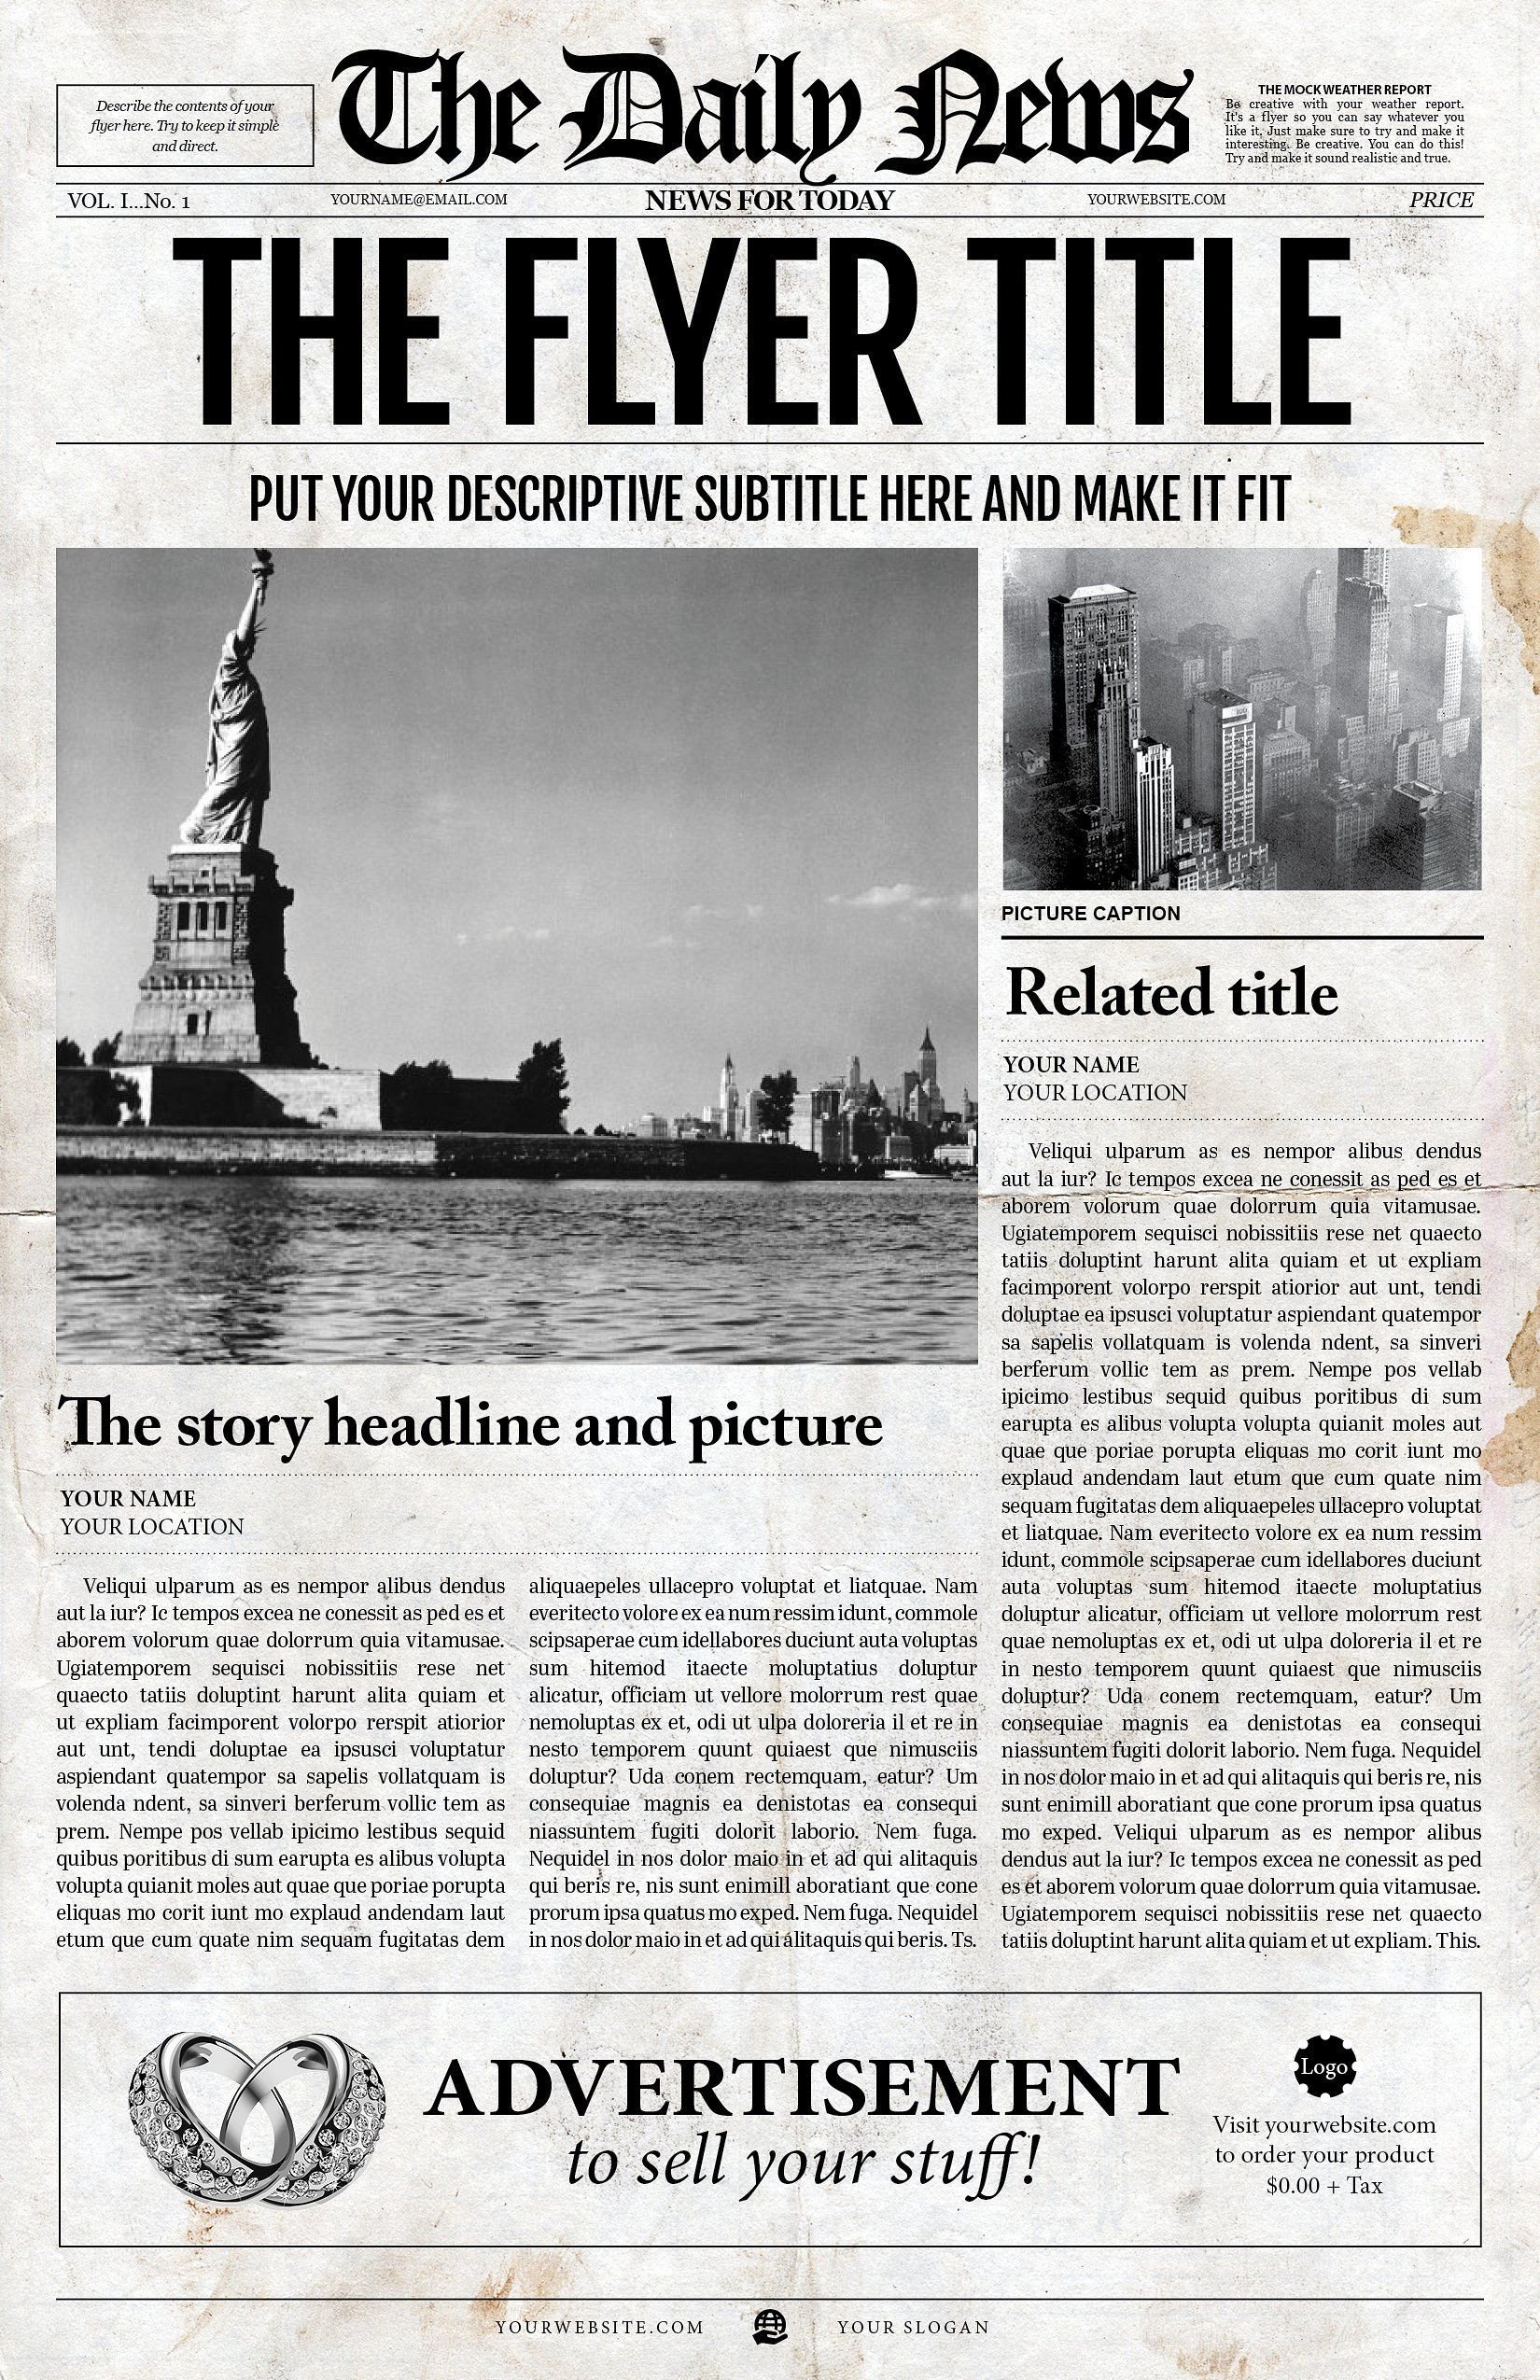 2x1 Page Newspaper Template Adobe InDesign 8 5x11 & 11x17